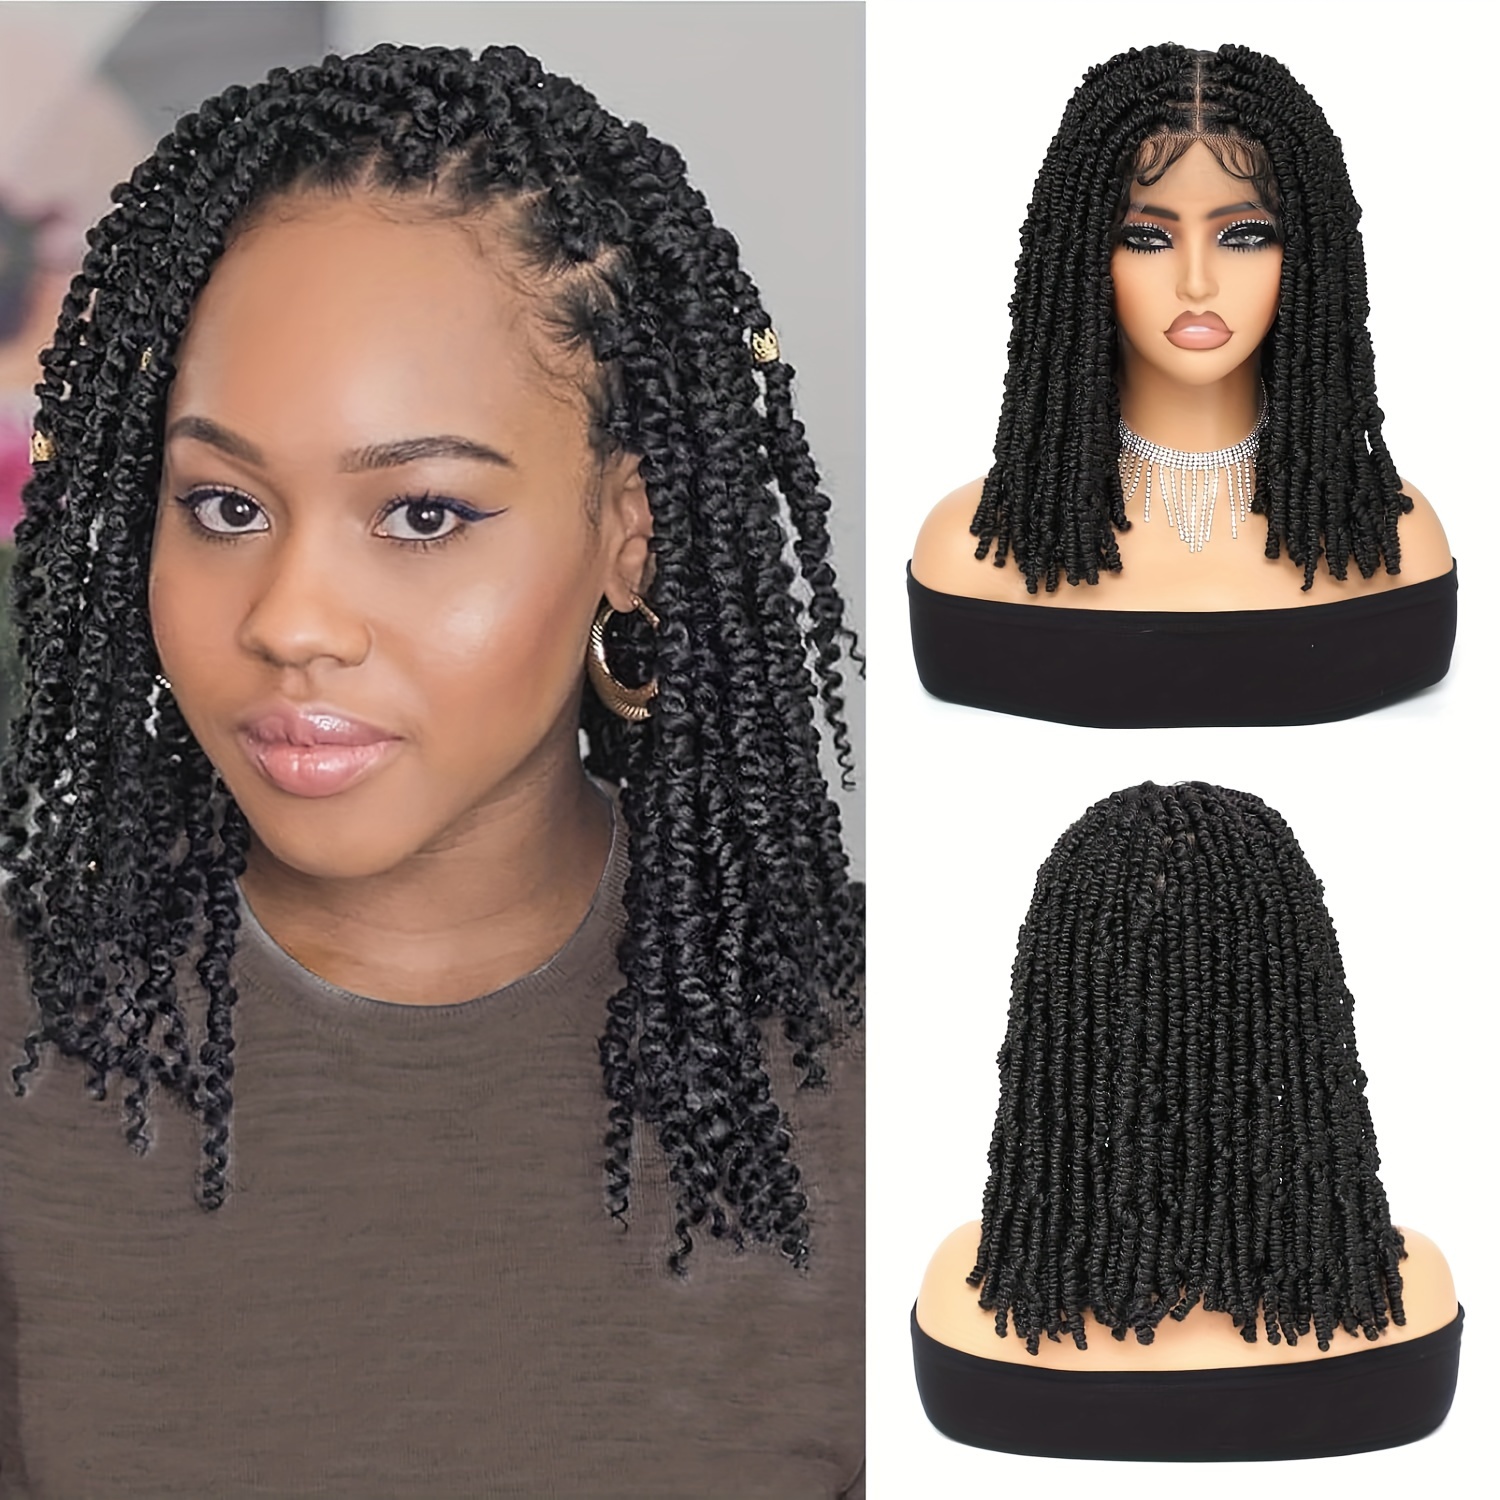 Passion Twist Hair Braided Wigs 12Inch Short Lace Front Wig Curly